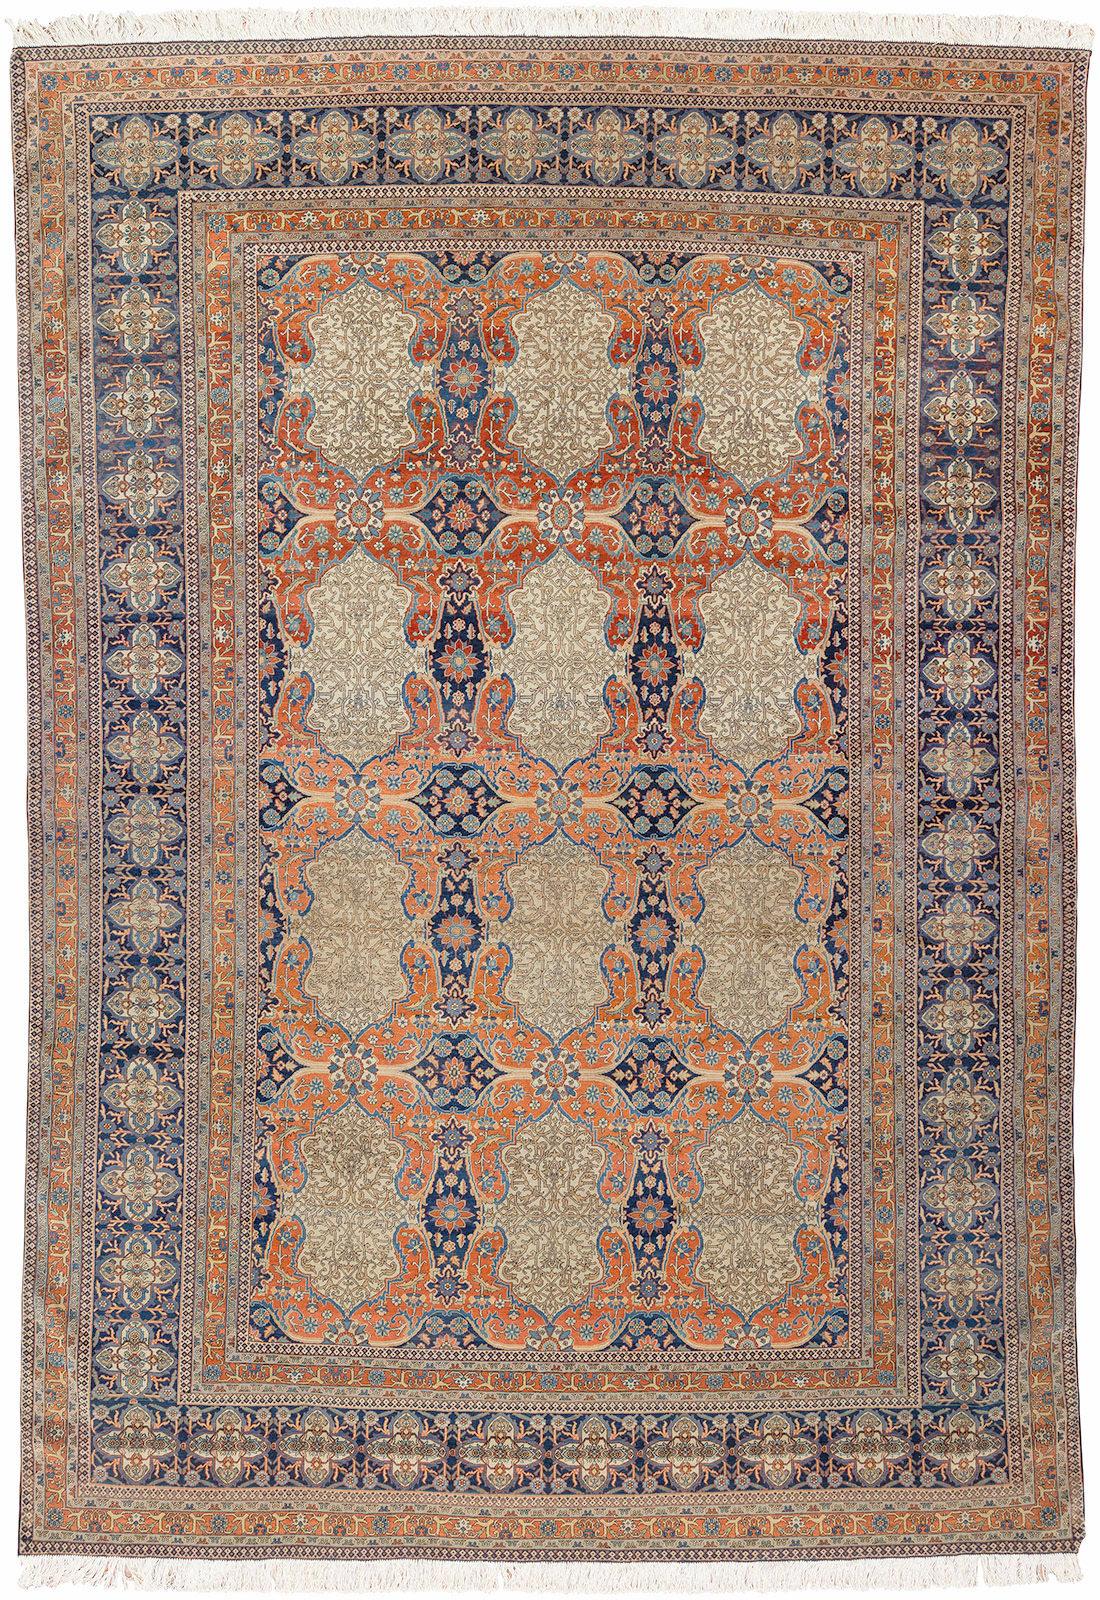 Museum Quality astonishing mid-19th century Mohtasham Kashan Rug. This carpet is just as gorgeous today as when it was woven 175 years ago, remarkably remaining in exceptional heavier medium pile condition.

Measures: 7'4'' x 10'9''

The most